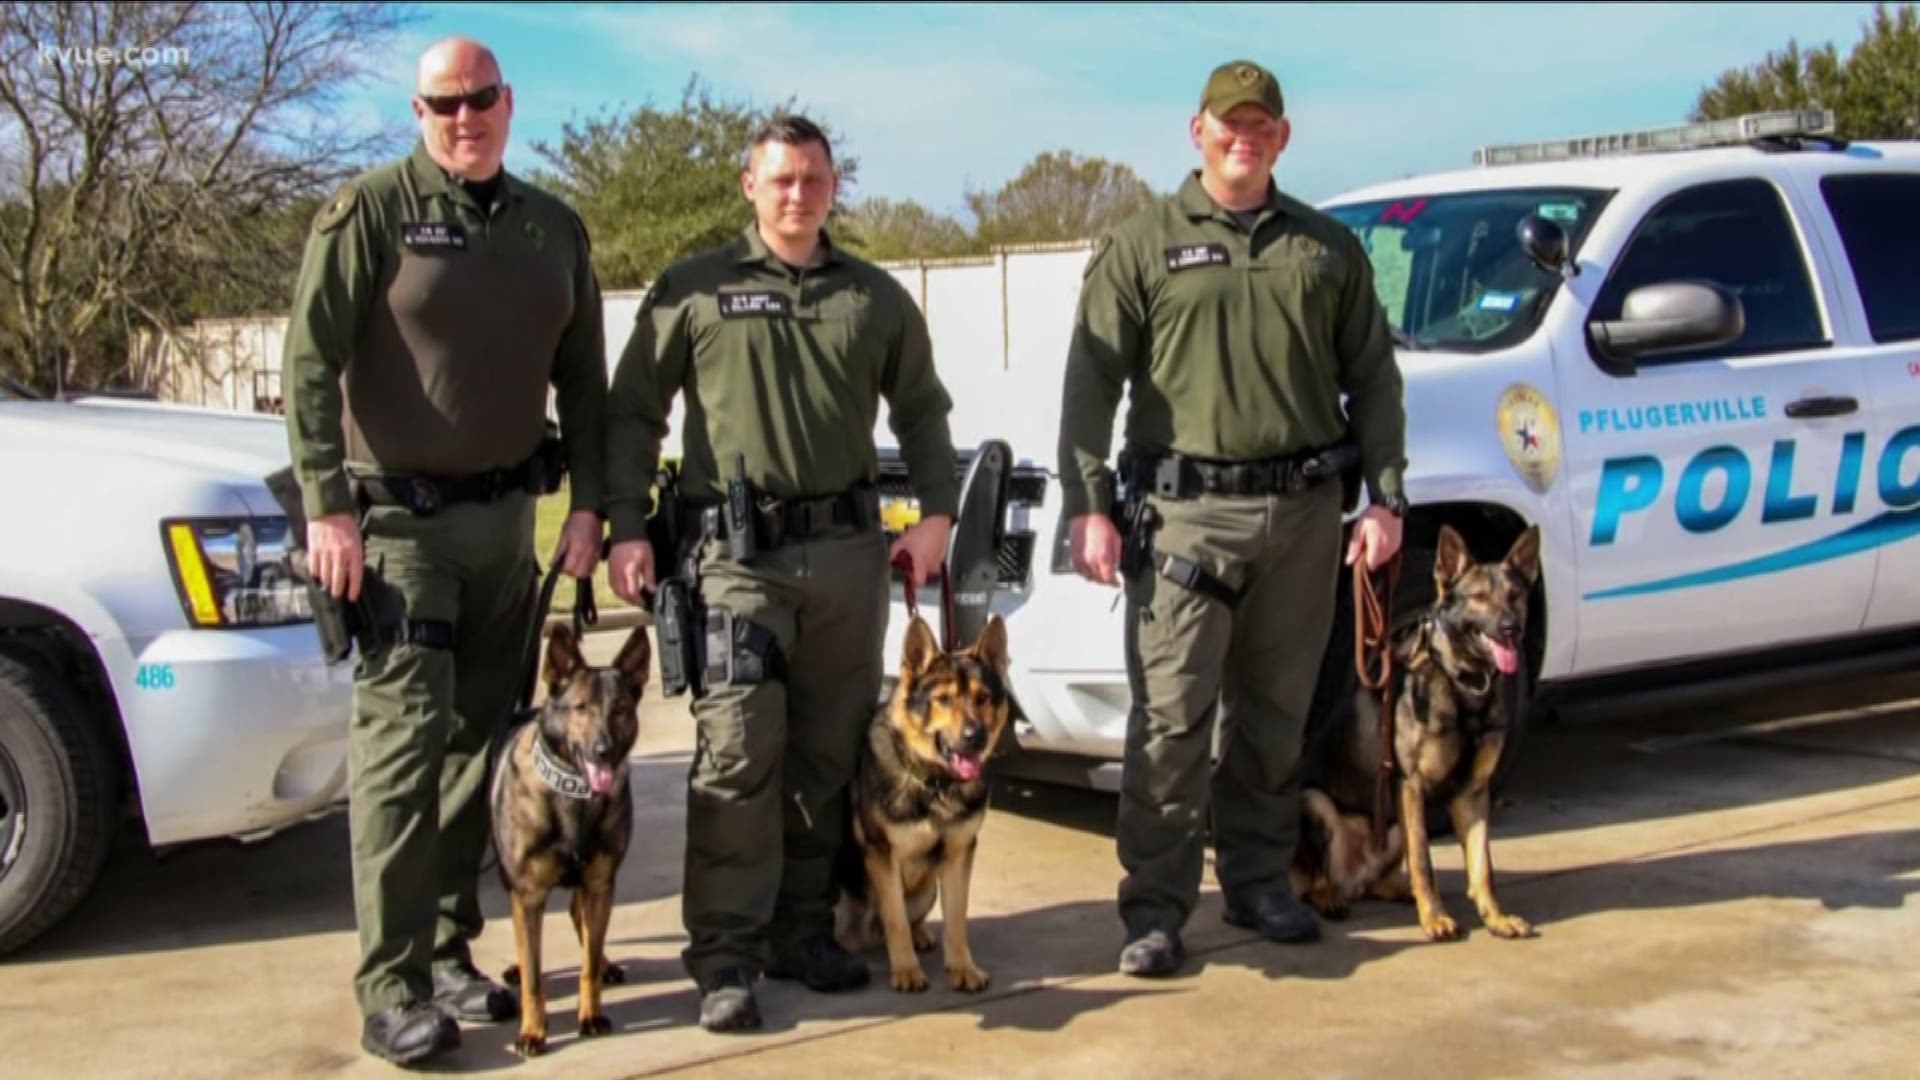 Pflugerville Police Department's K9 units Isa, Lubo, and Tymo are set to get a donation of body armor.